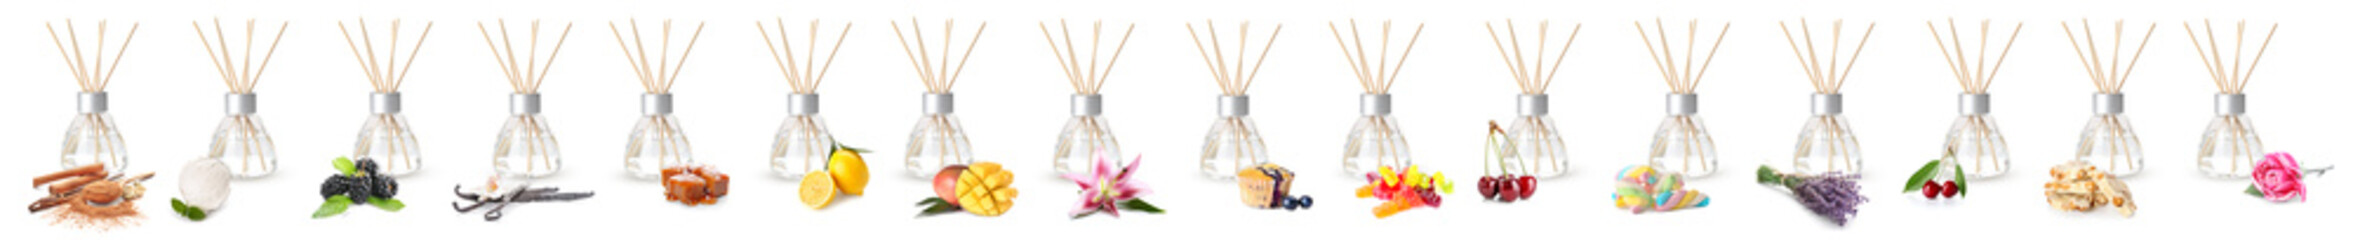 Many different reed diffusers on white background